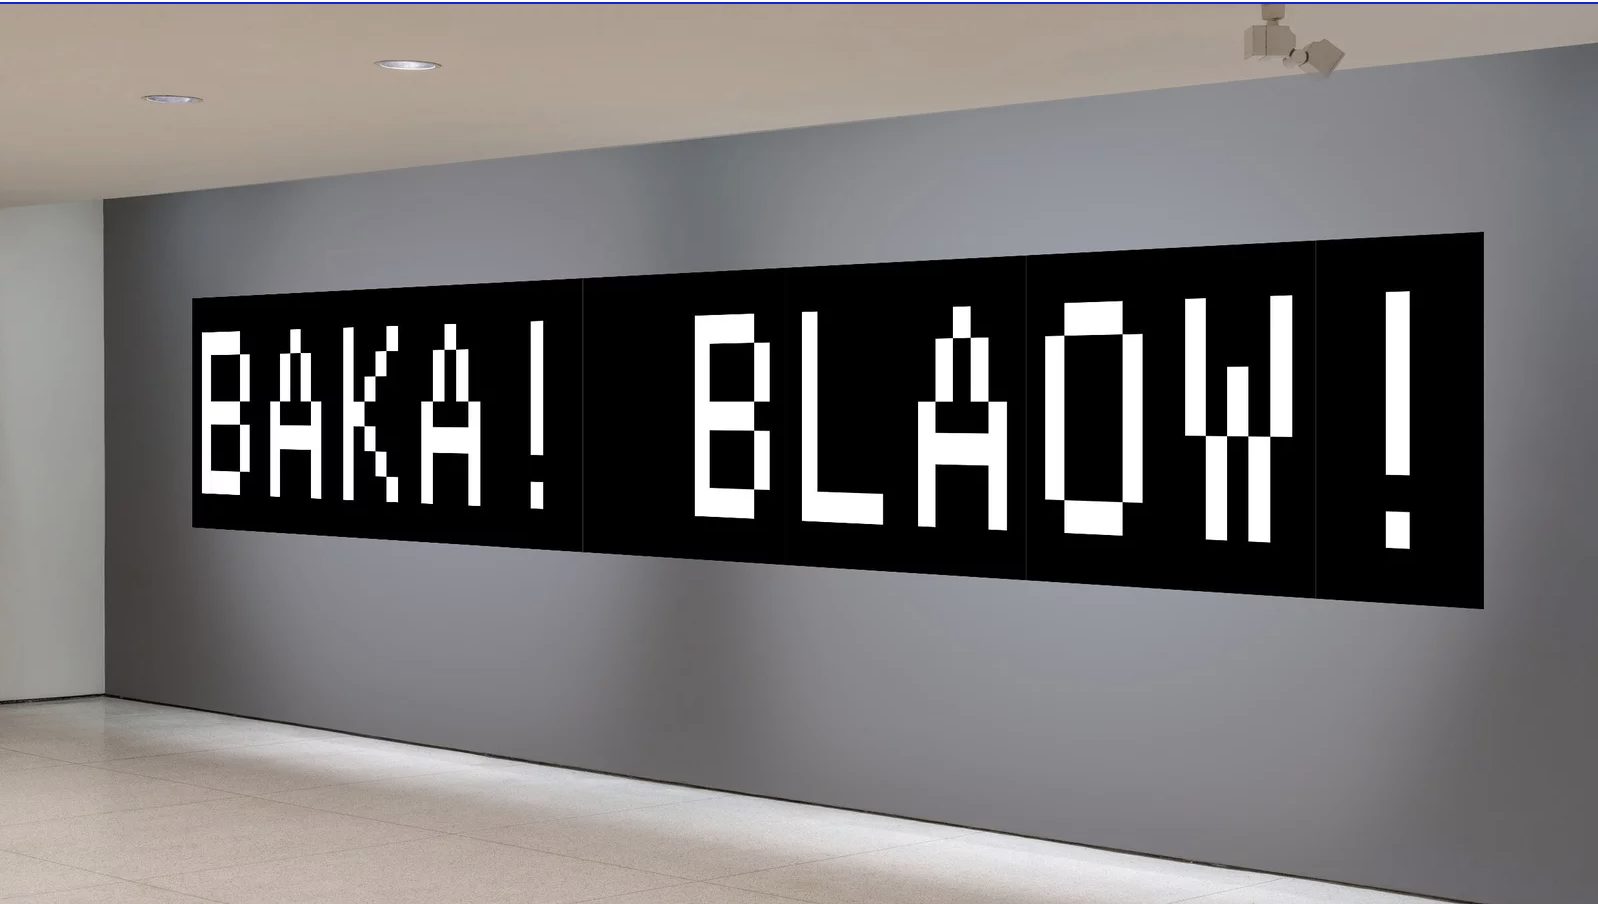 A black vinyl poster with the text "BAKA! BLAOW!" on a grey wall.